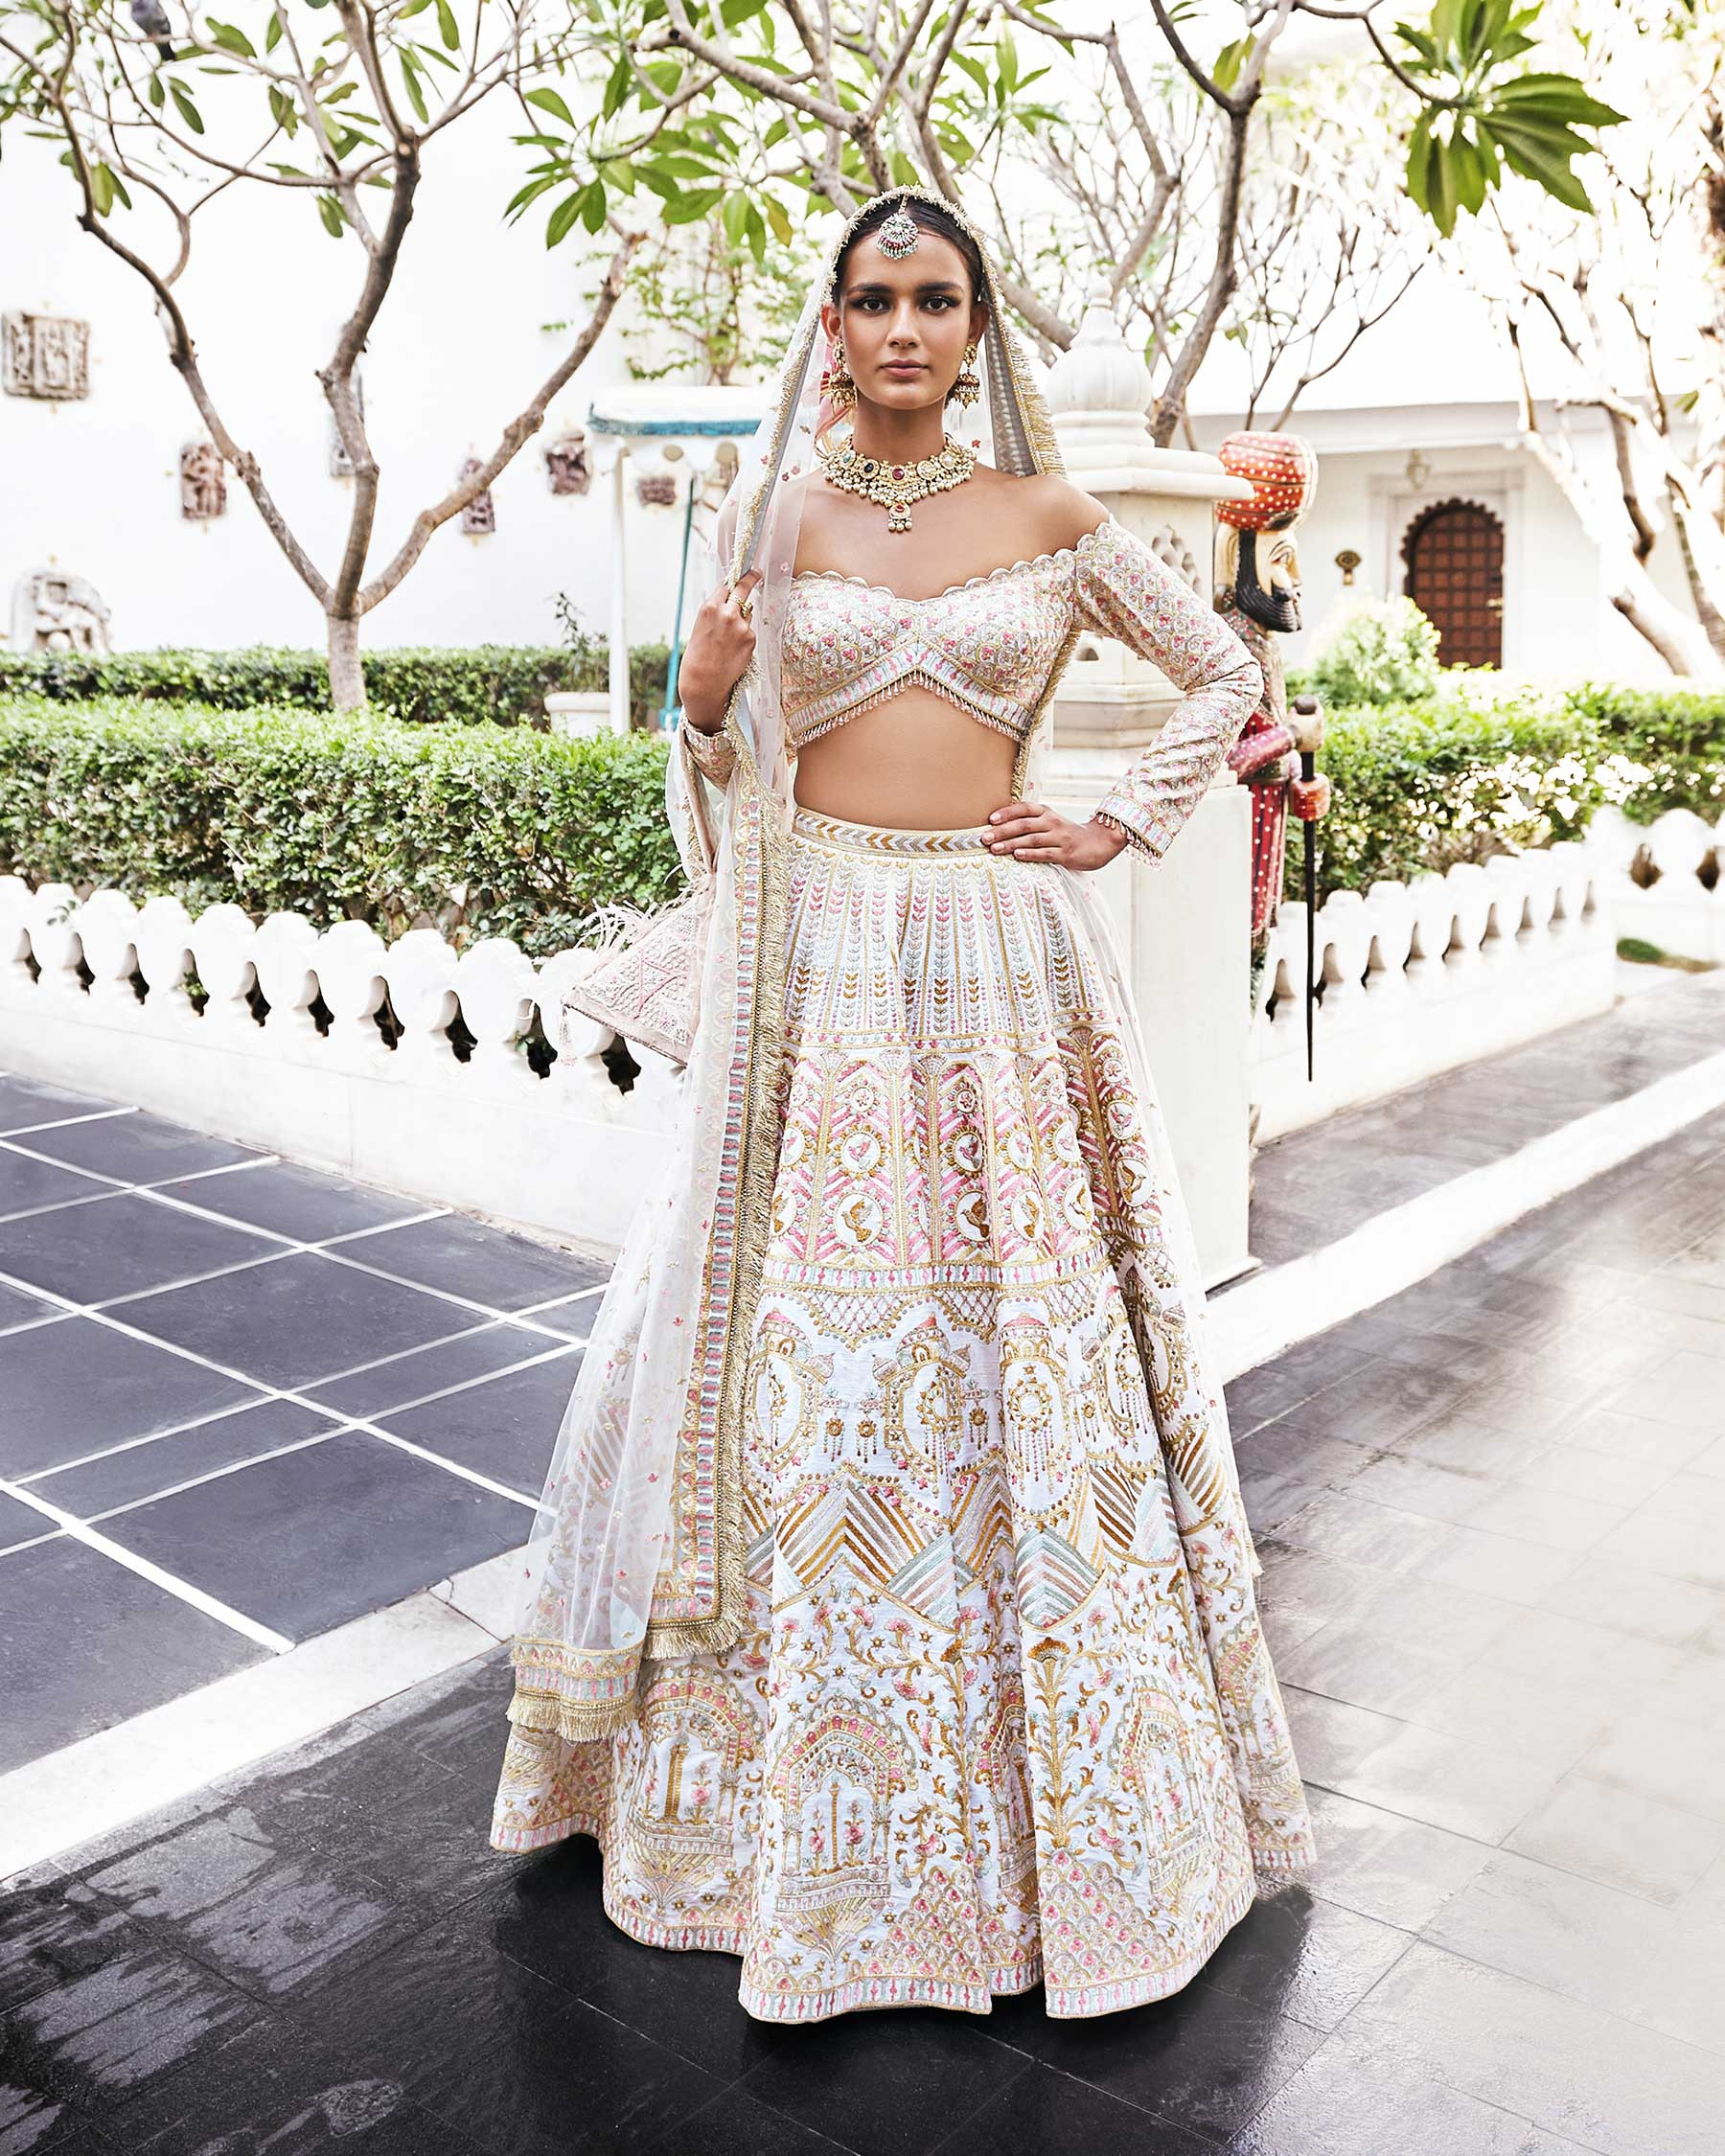 Dubai Wedding With A Stunning Mirror Work Pink Lehenga With An Off-Shoulder  Blouse - Witty Vows %